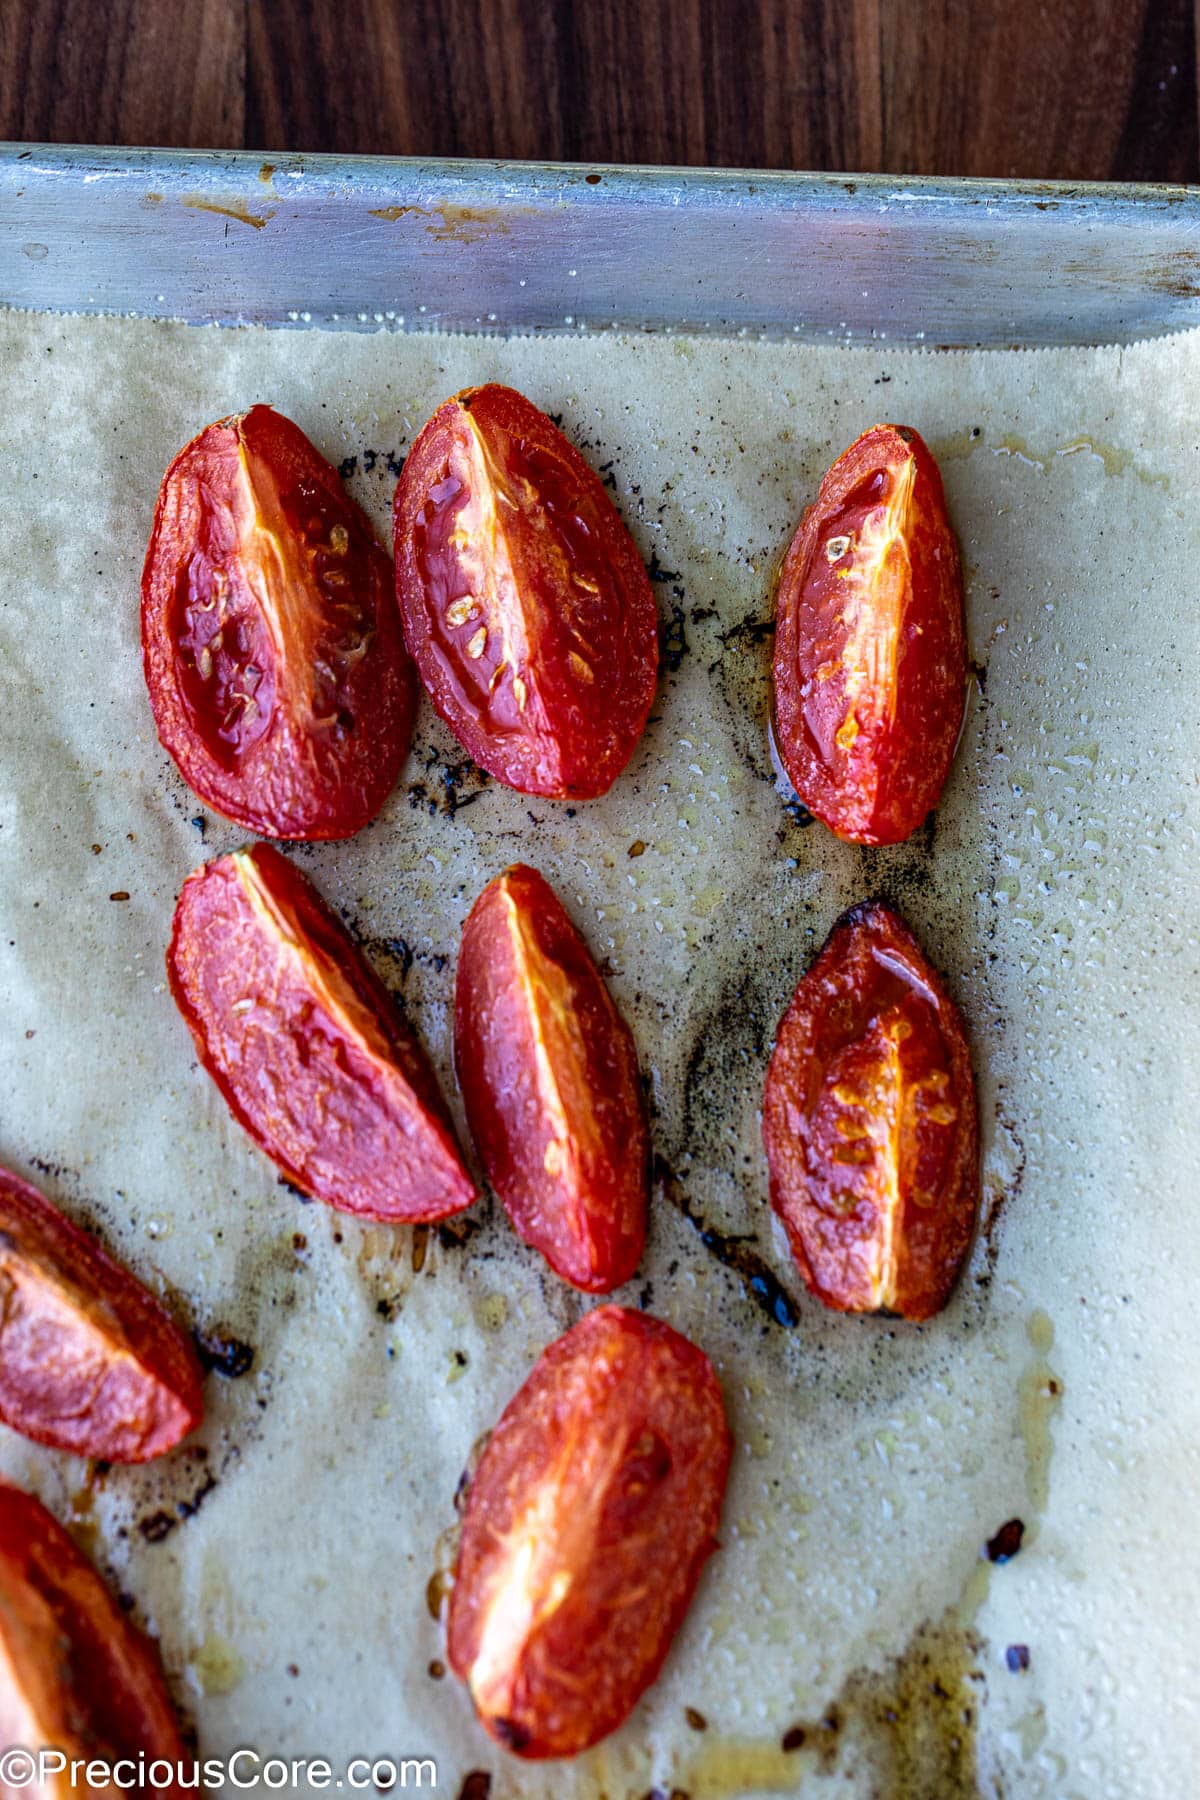 Roasted tomatoes on a baking sheet lined with parchment paper.